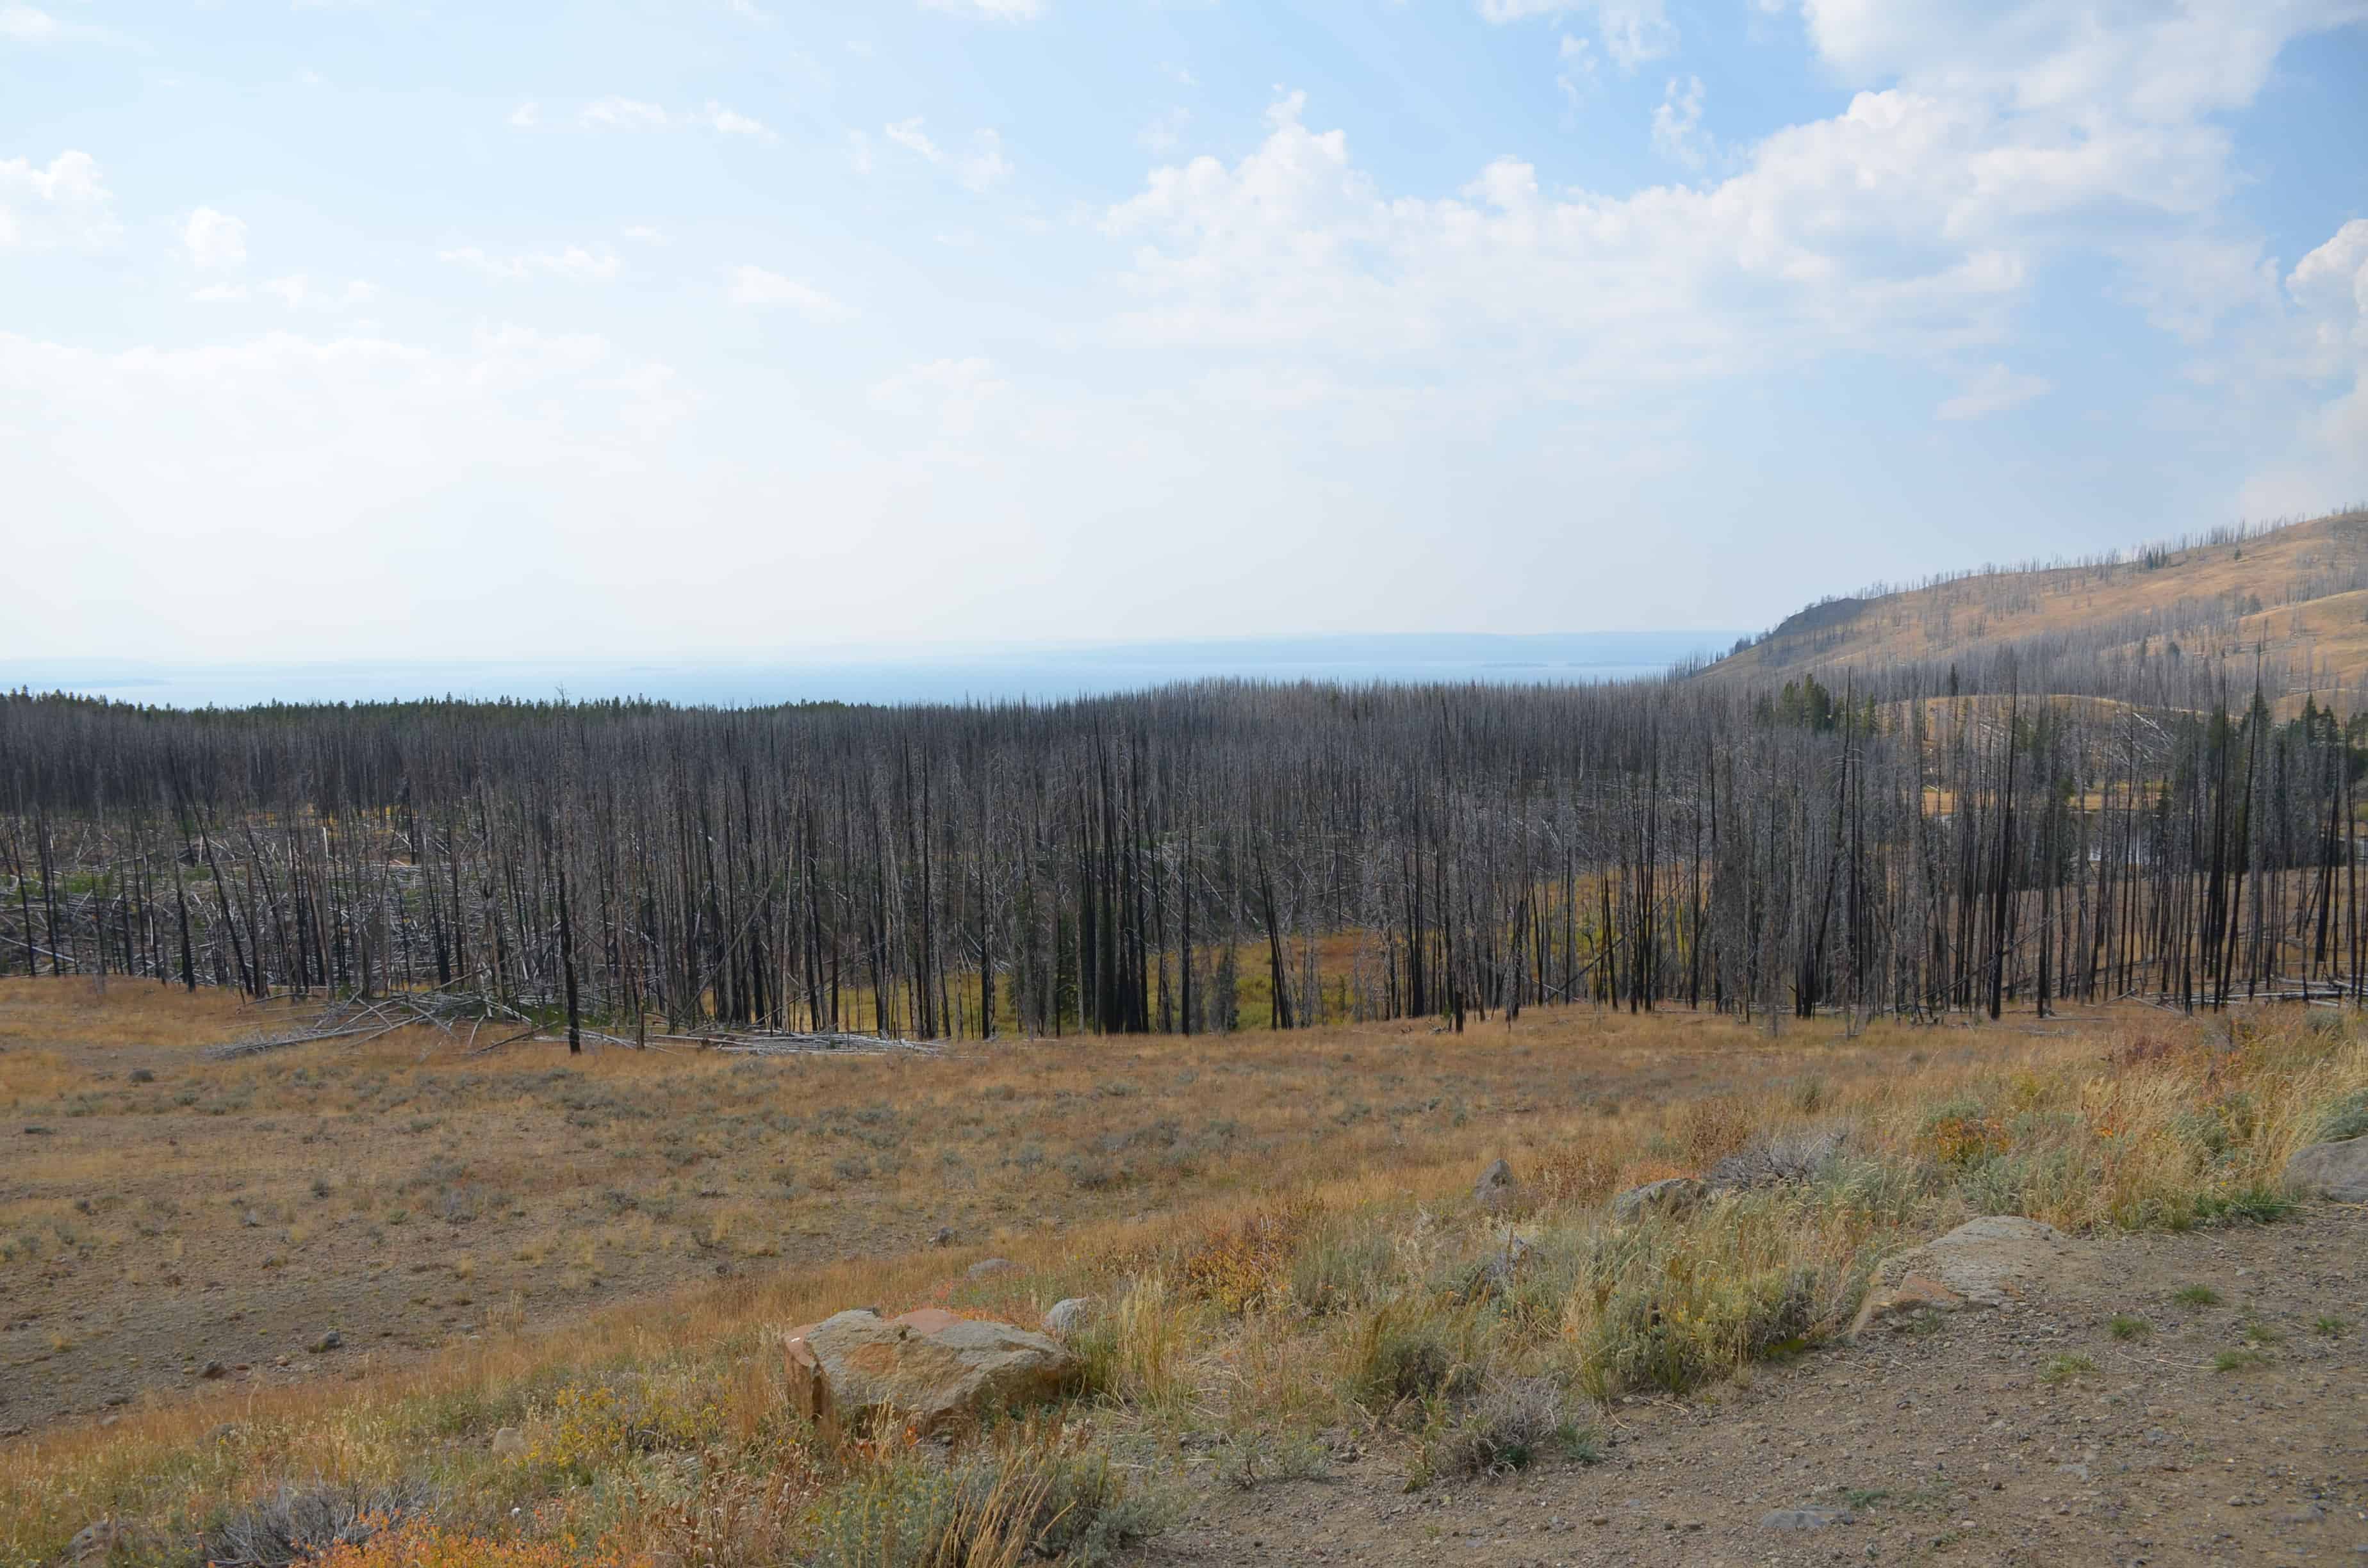 Forest fire aftermath in Yellowstone National Park